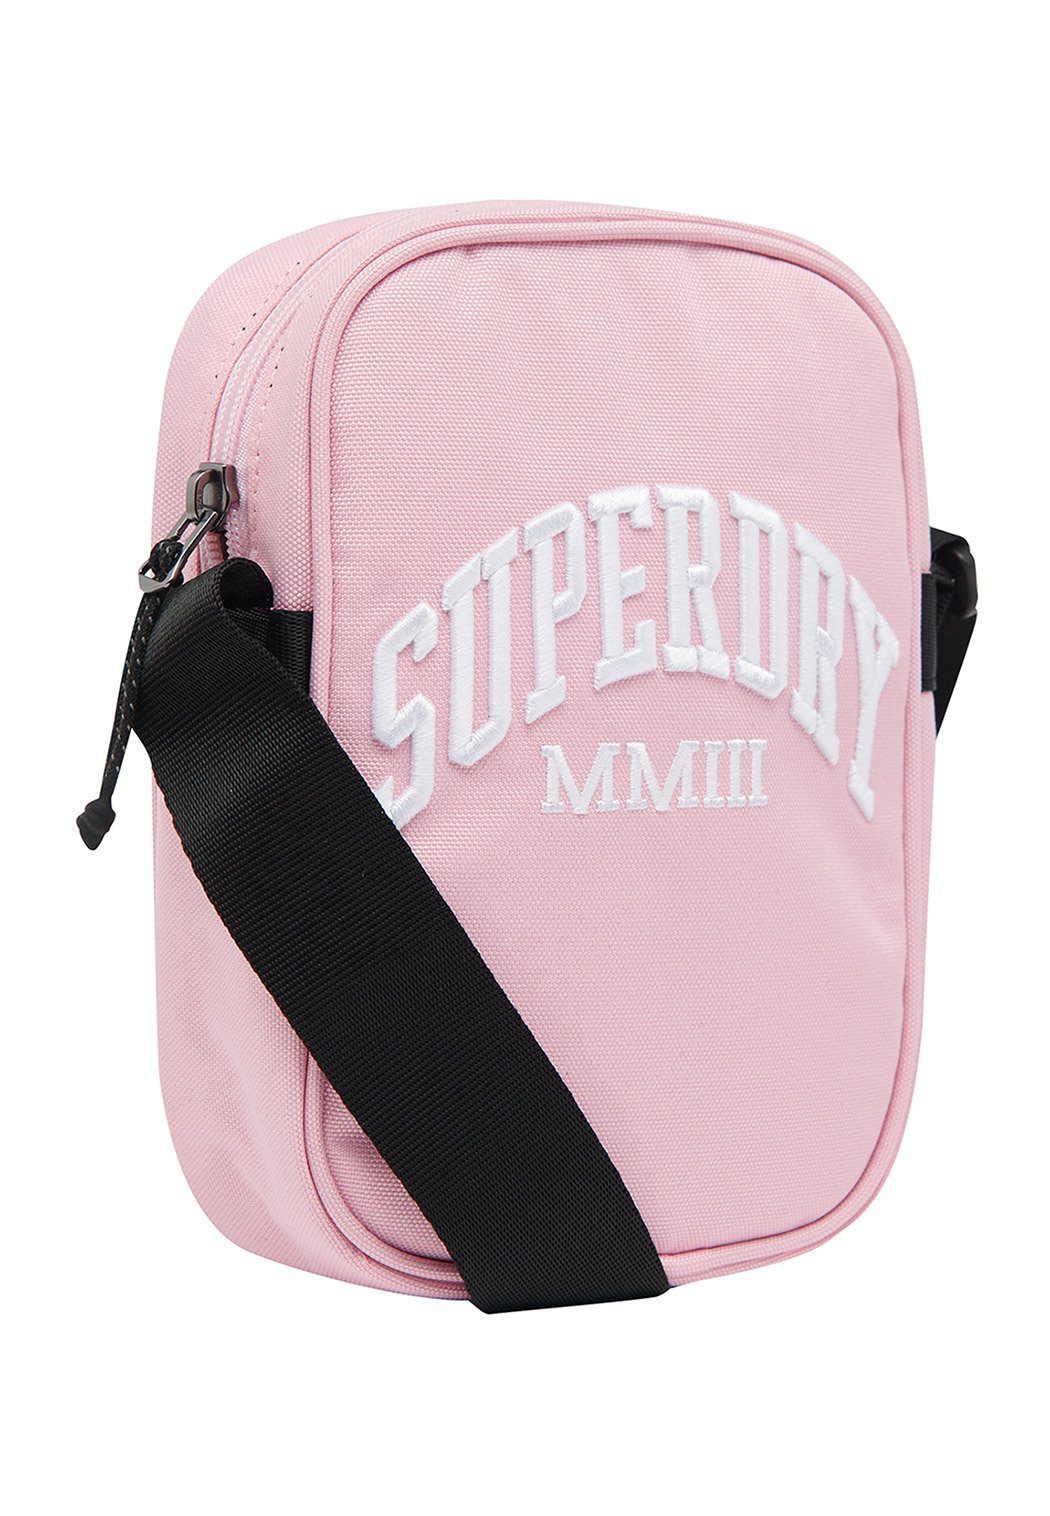 Superdry Umhängetasche »Superdry Umhängetasche SIDE BAG Roseate Pink Rosa«  online kaufen | OTTO